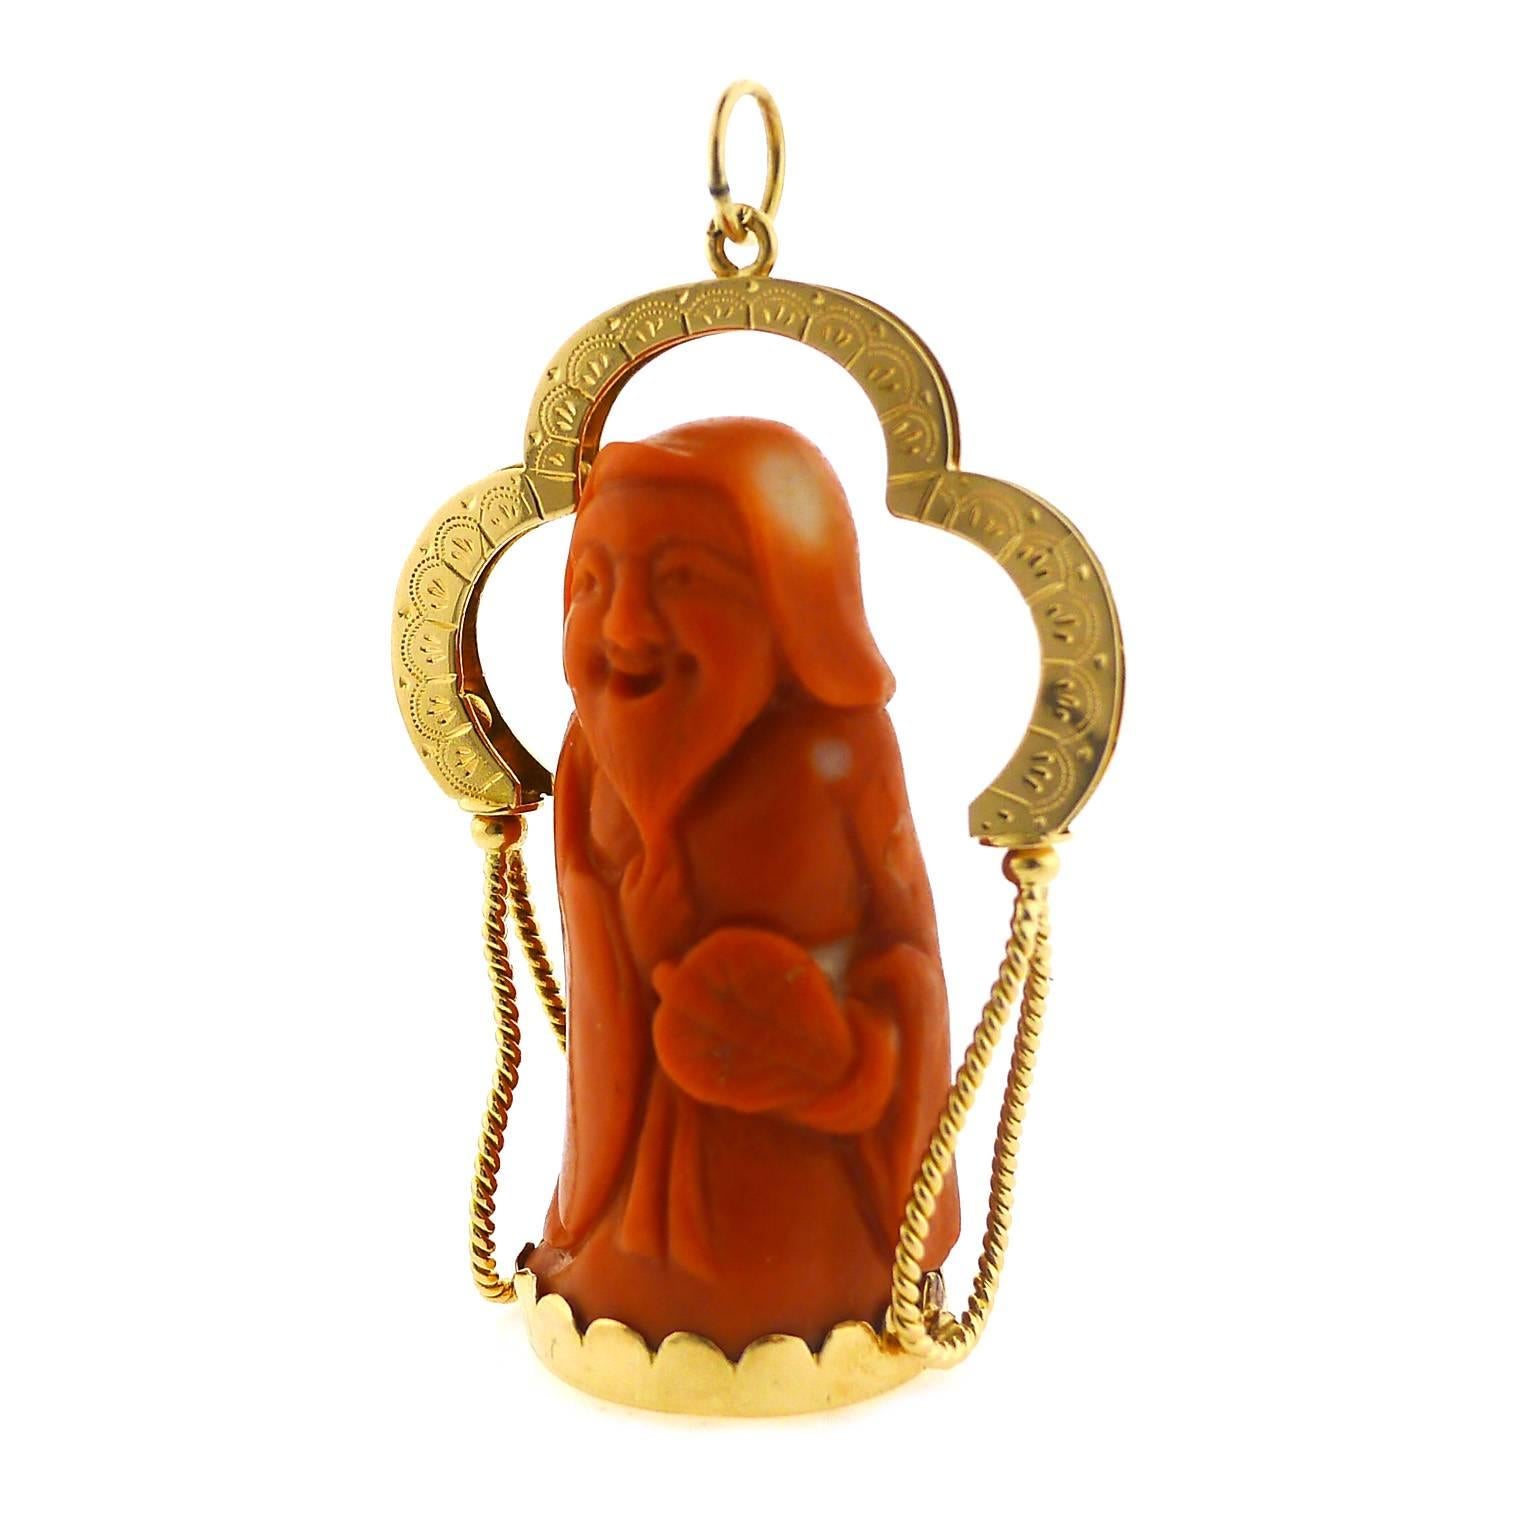 This 40 millimeter high carved coral figure sits in an 18 karat yellow gold base with a handmade and hand engraved casing. The total height is 50 millimeters.  Coral is in excellent condition.